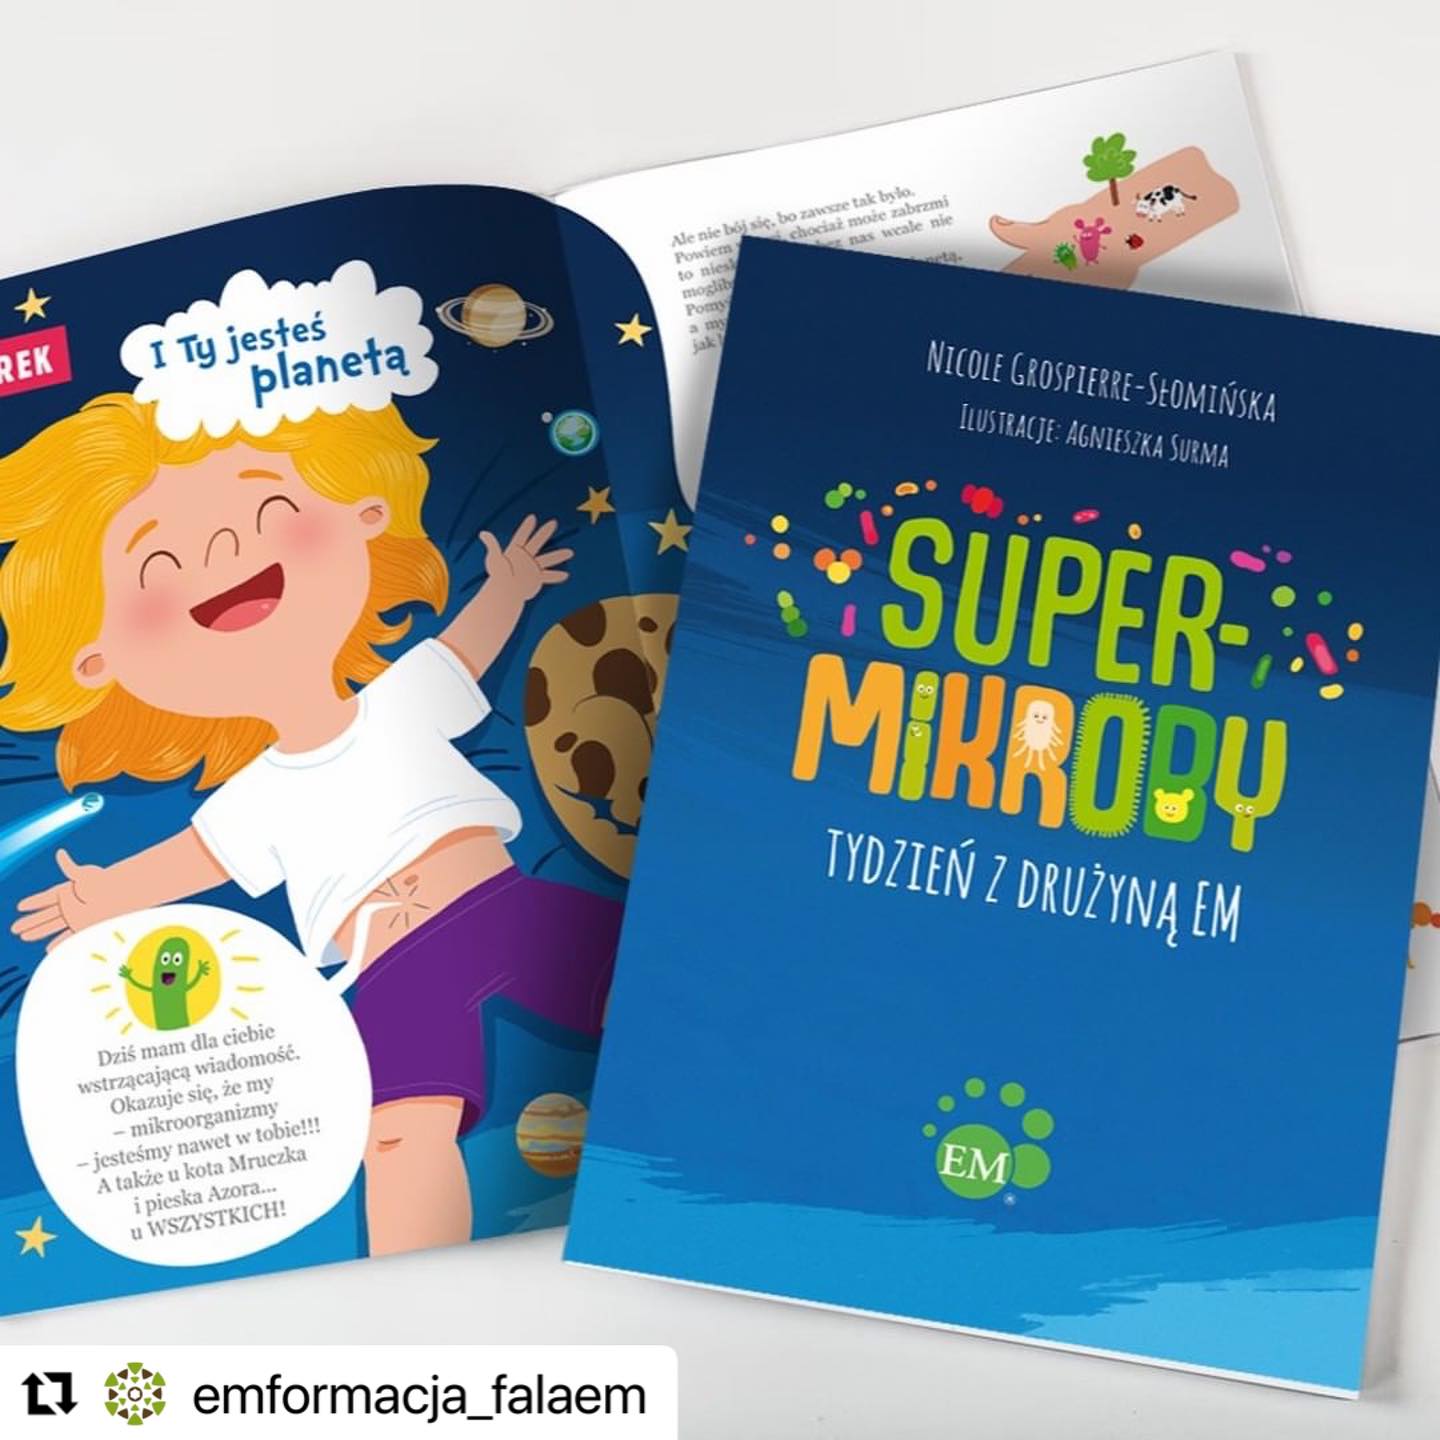 Children's book, "Super-Microbes Week with Team EM” has been published in Poland